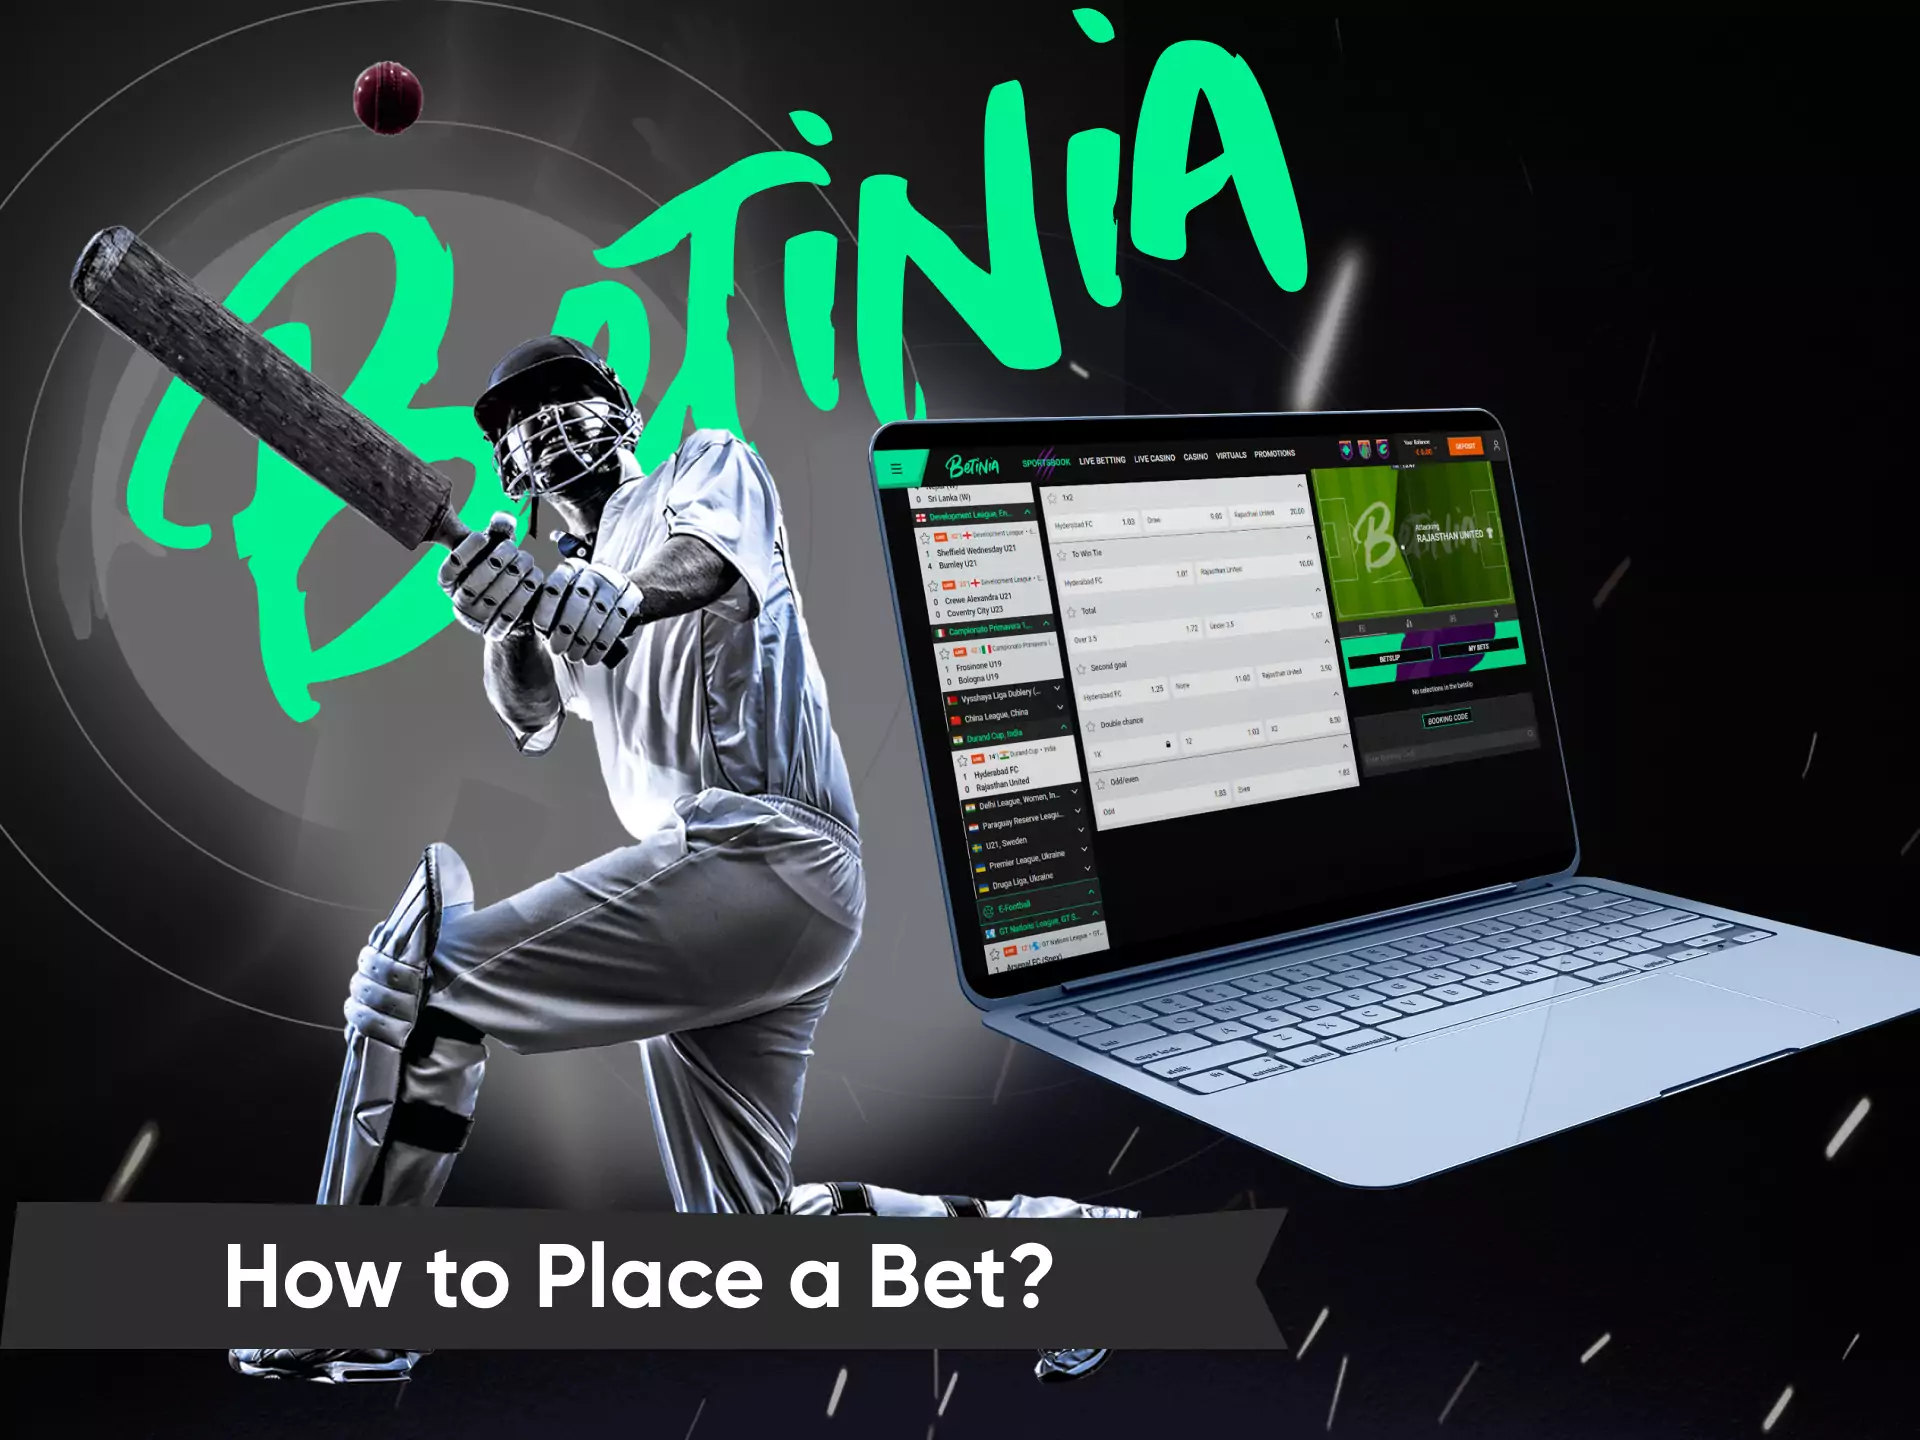 On Betinia, you can place a bet on any available sports or esports match.